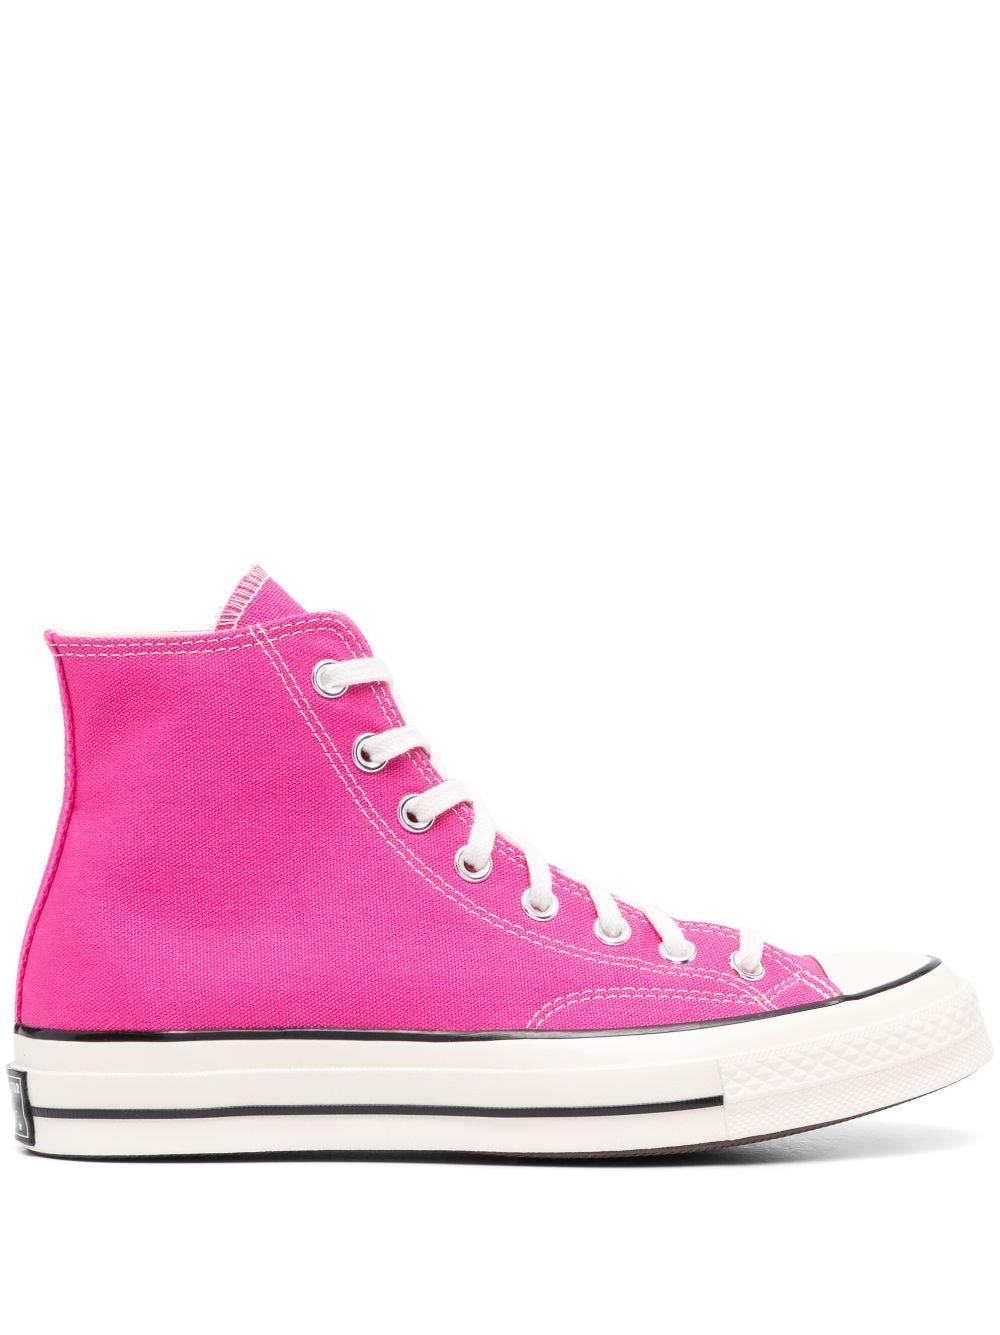 Converse Chuck 70 High-top Sneakers in Pink | Lyst